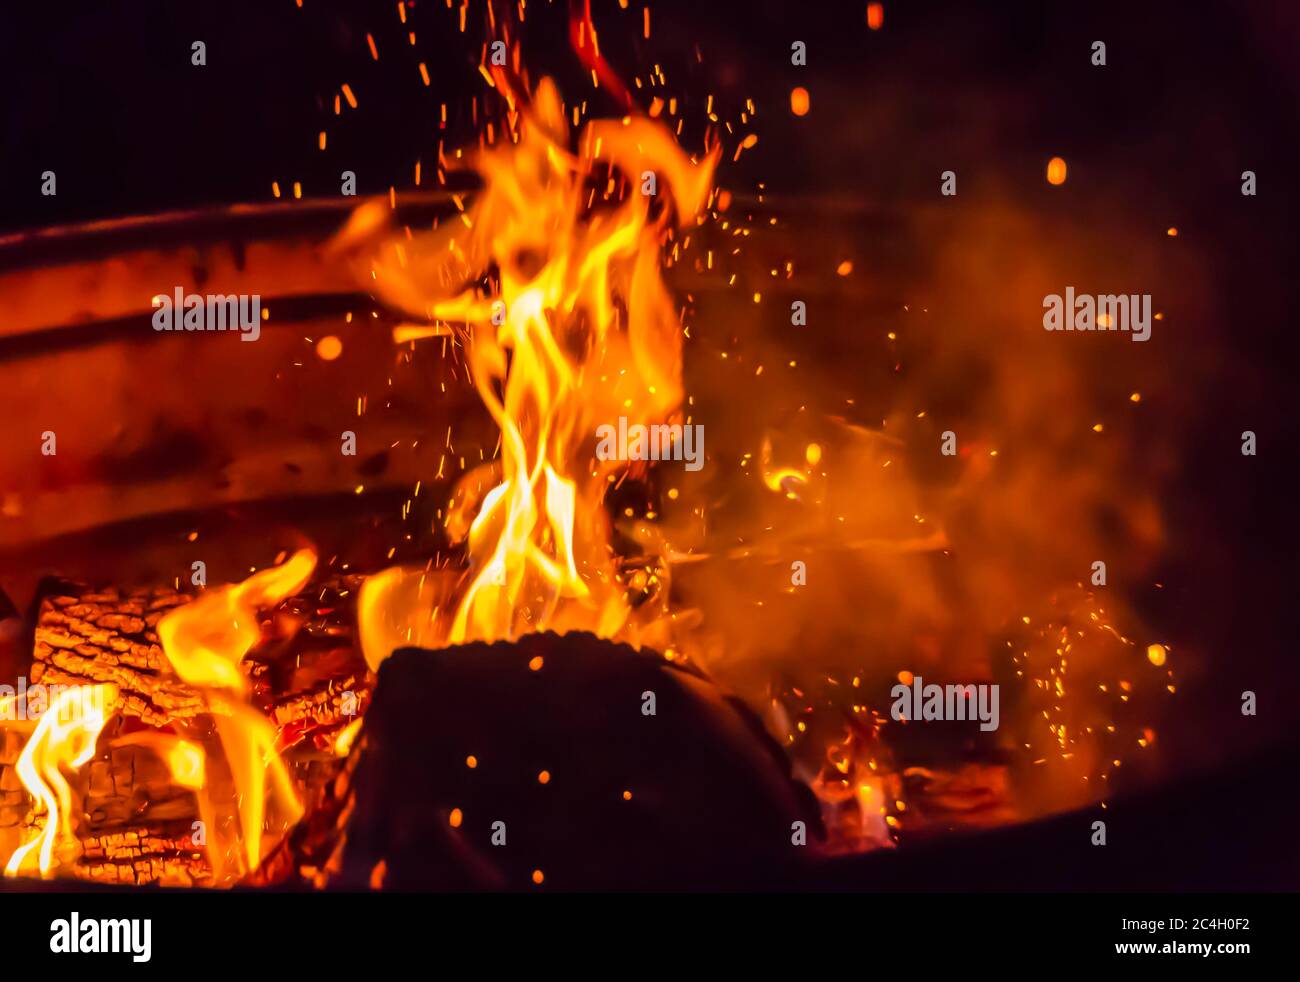 Flames rise from logs being burnt in a bonfire lit inside a metal drum. Stock Photo